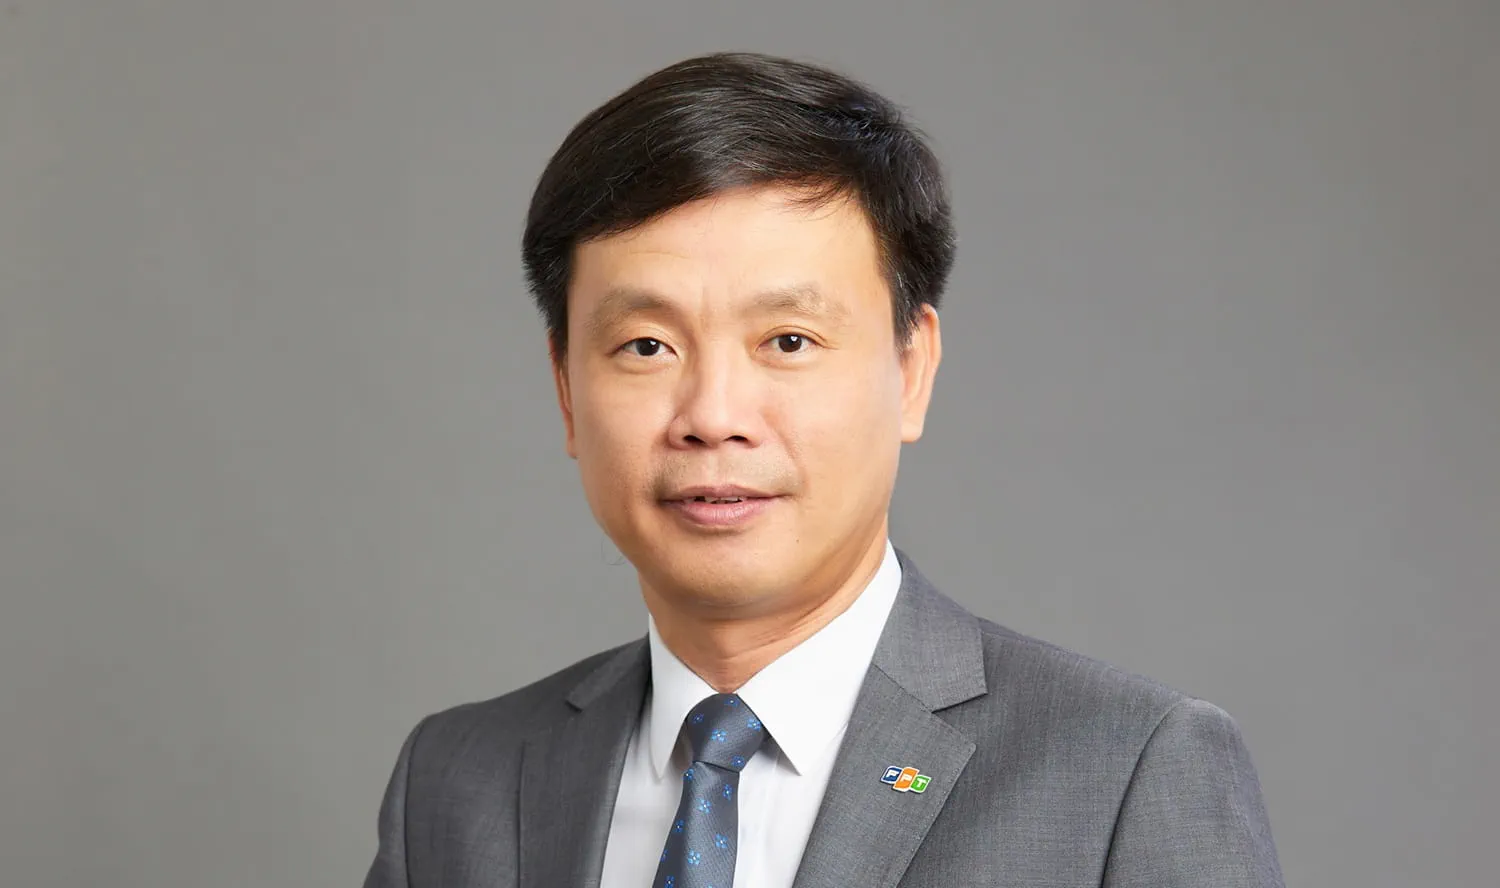 The FPT Corporation has recently appointed Mr. Pham Minh Tuan as the Executive Vice President of FPT